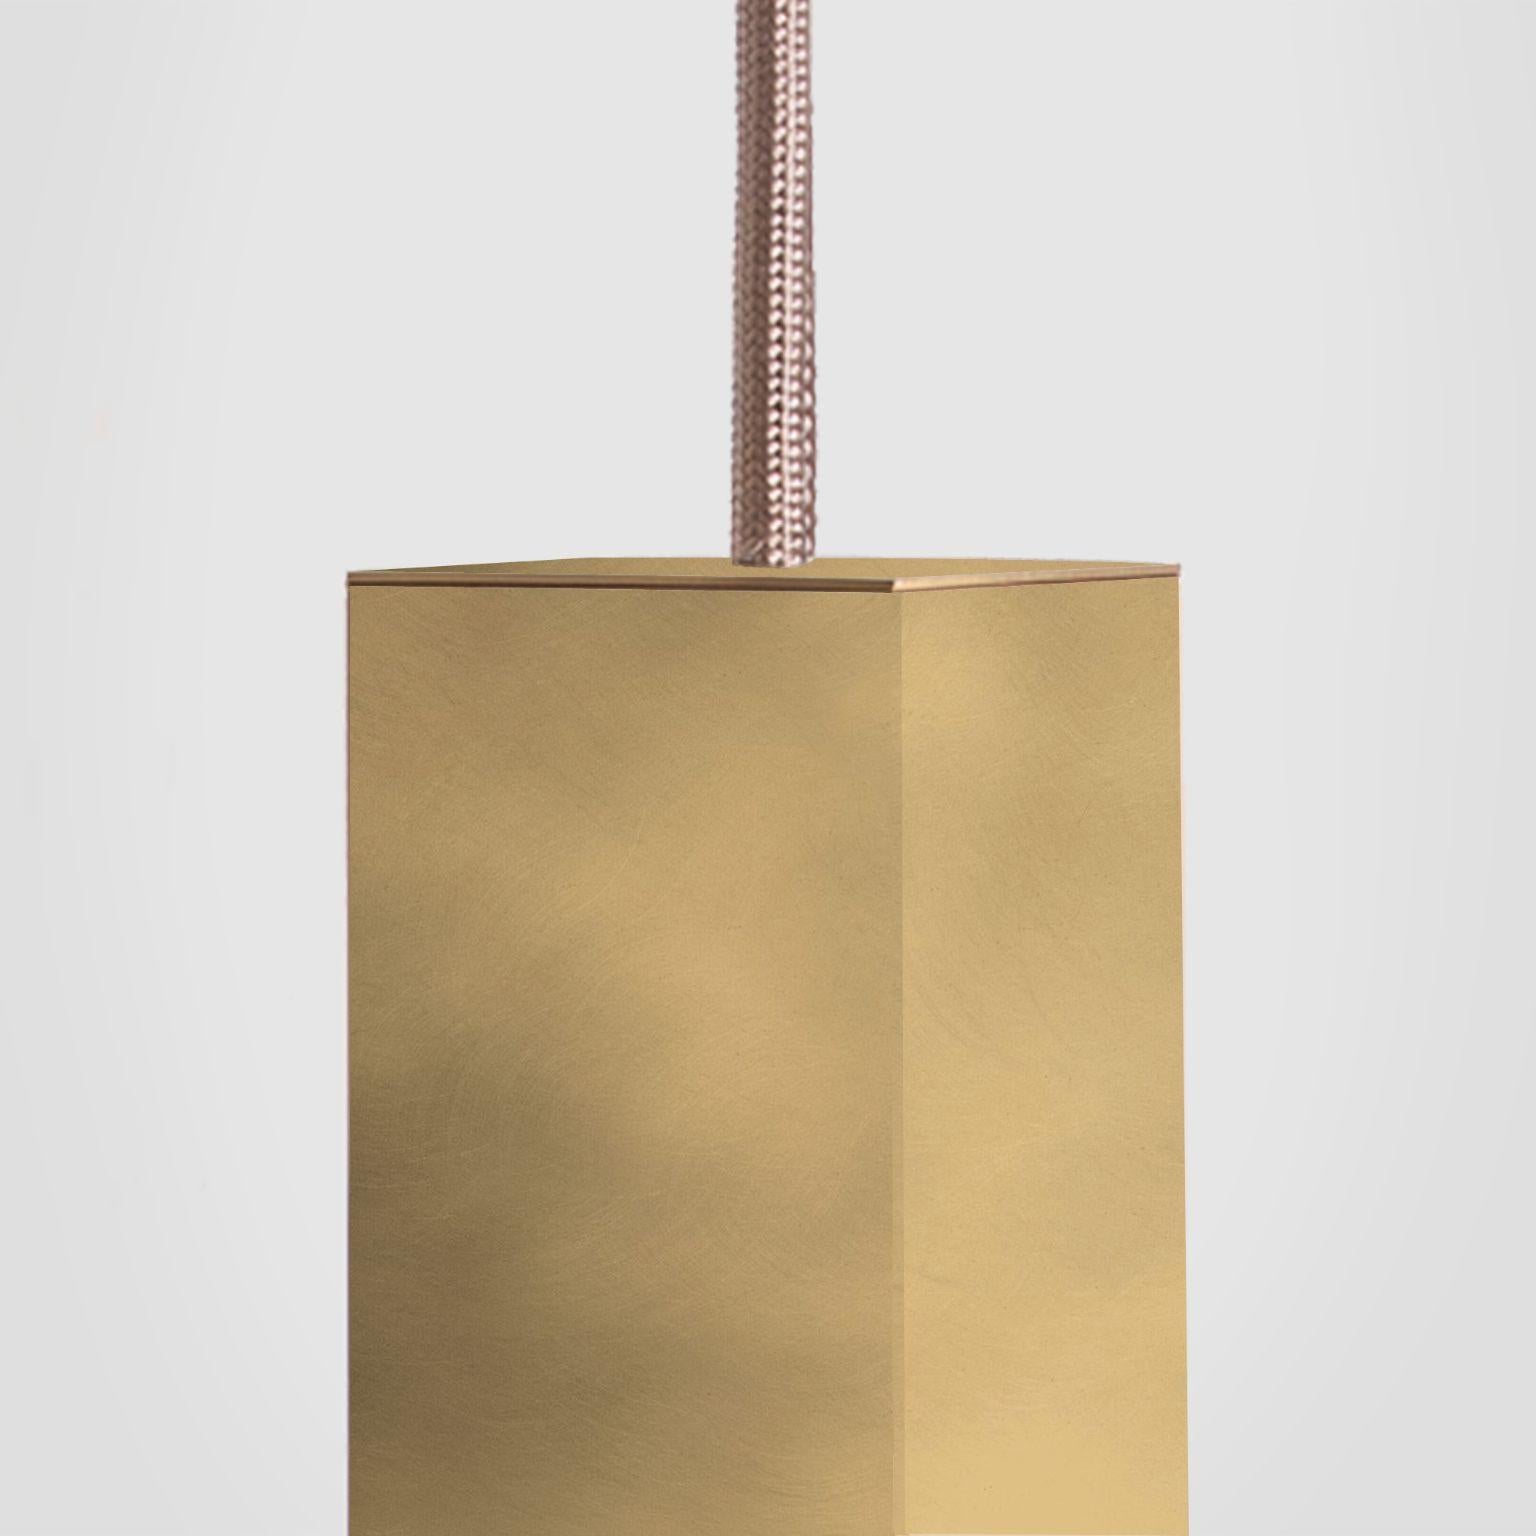 Other Lamp One Brass 02 Revamp Edition by Formaminima For Sale